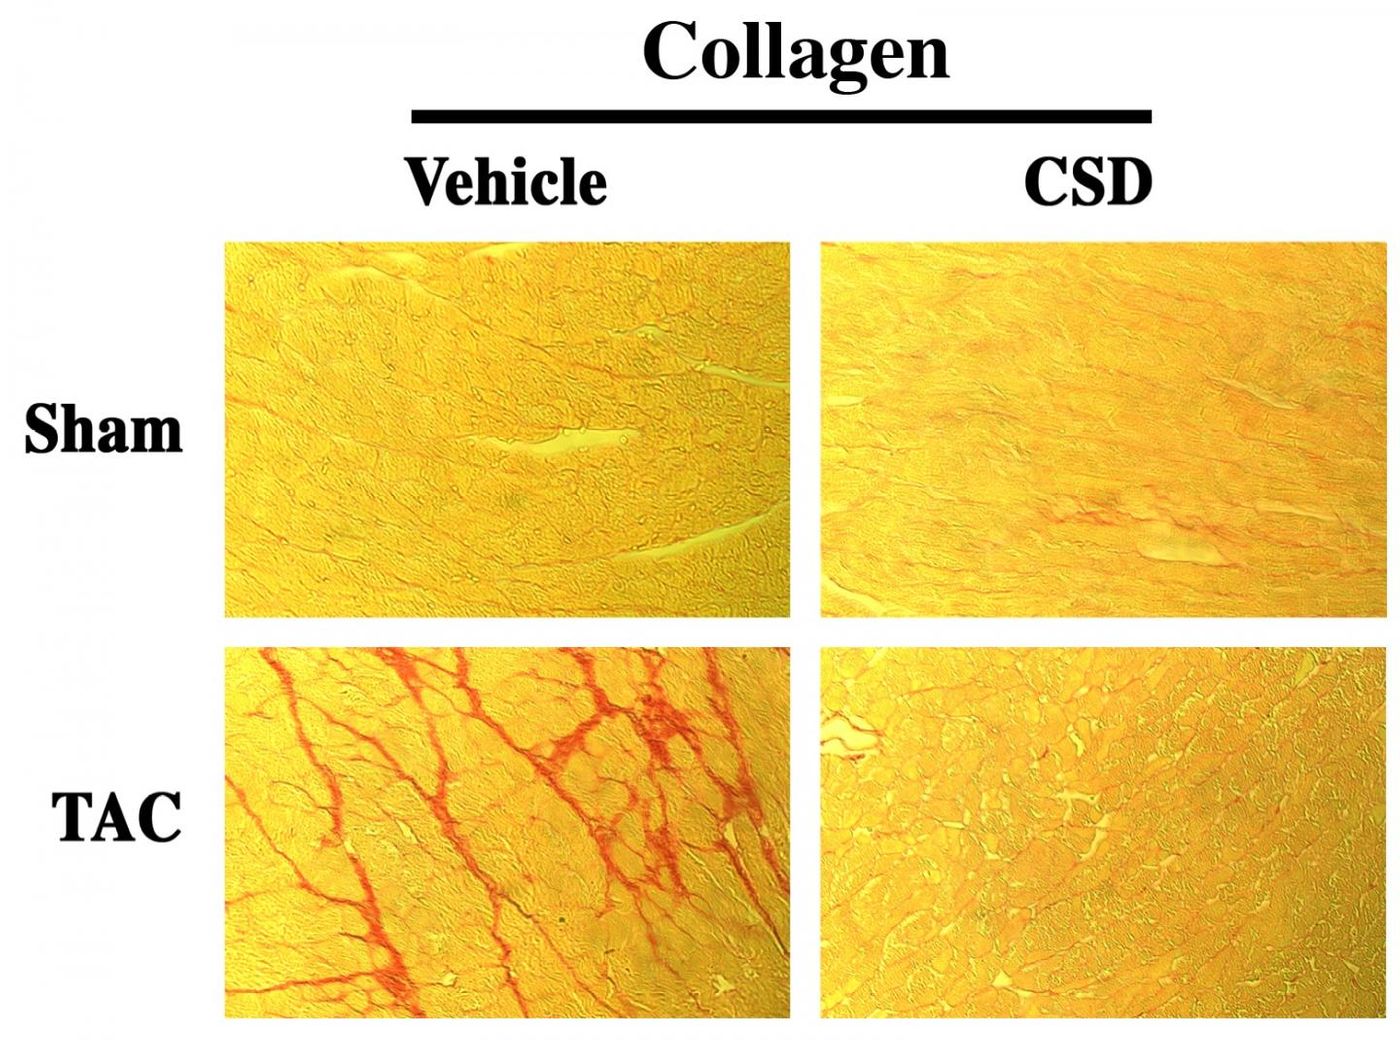 Caveolin-1 scaffolding domain (CSD) peptide reverses collagen accumulation in pressure overloaded (TAC) myocardium. Source: Dr. Hoffman and Dr. Kuppuswamy from a figure published in Laboratory Investigation